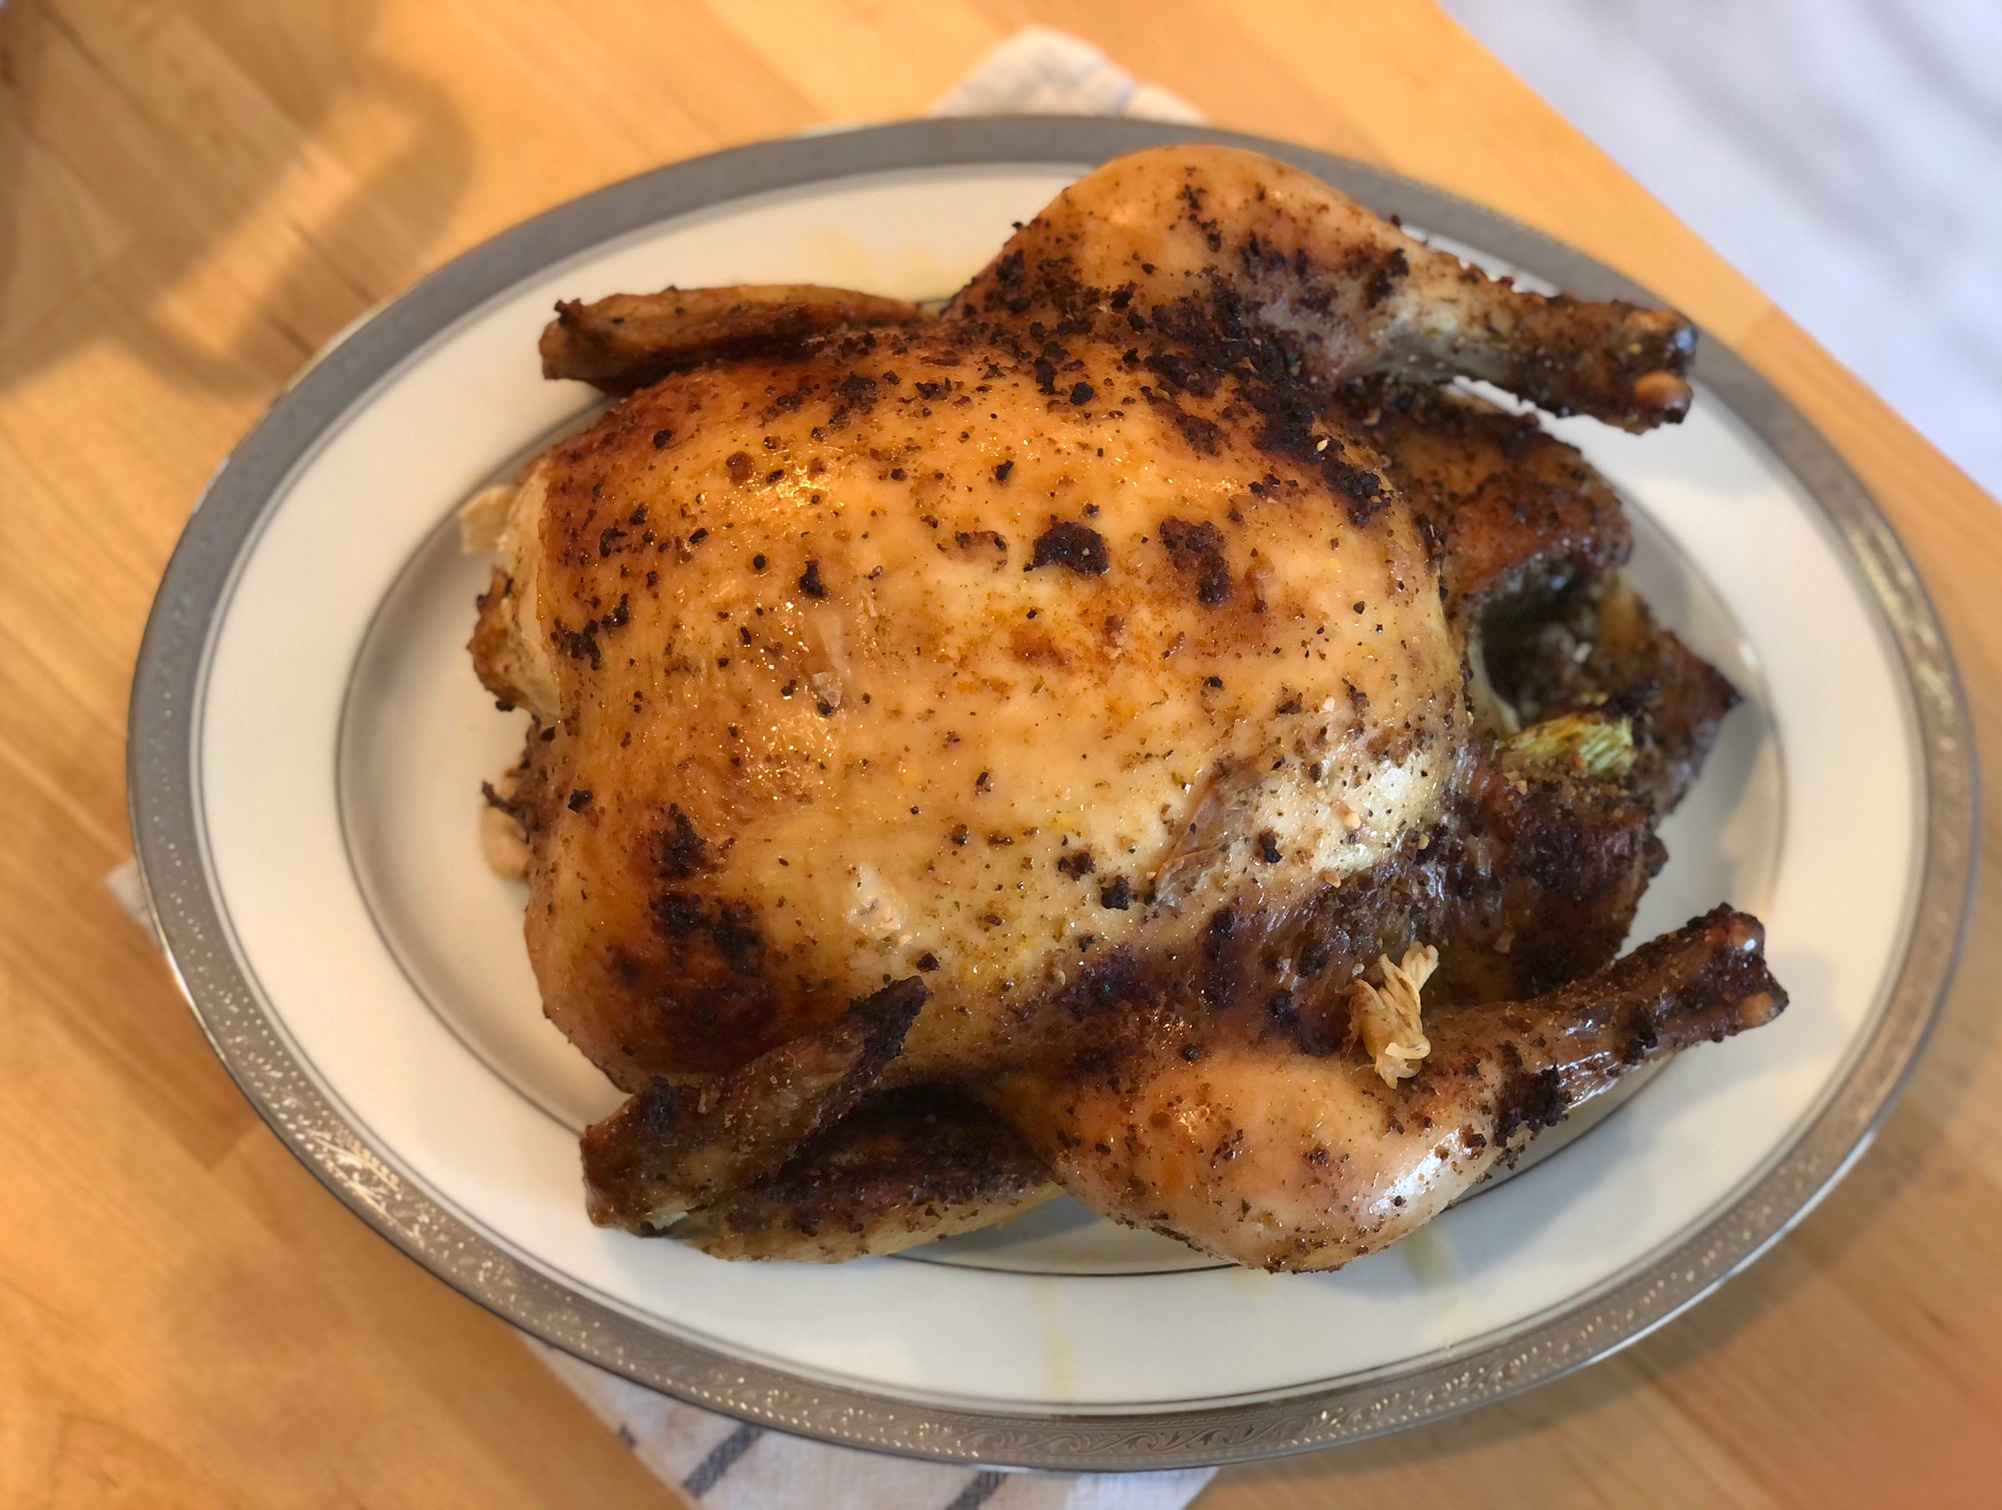 An overhead photo shows a fully cooked, seasoned whole chicken on a white platter with a silver border. Photo by Alyssa Buckley.